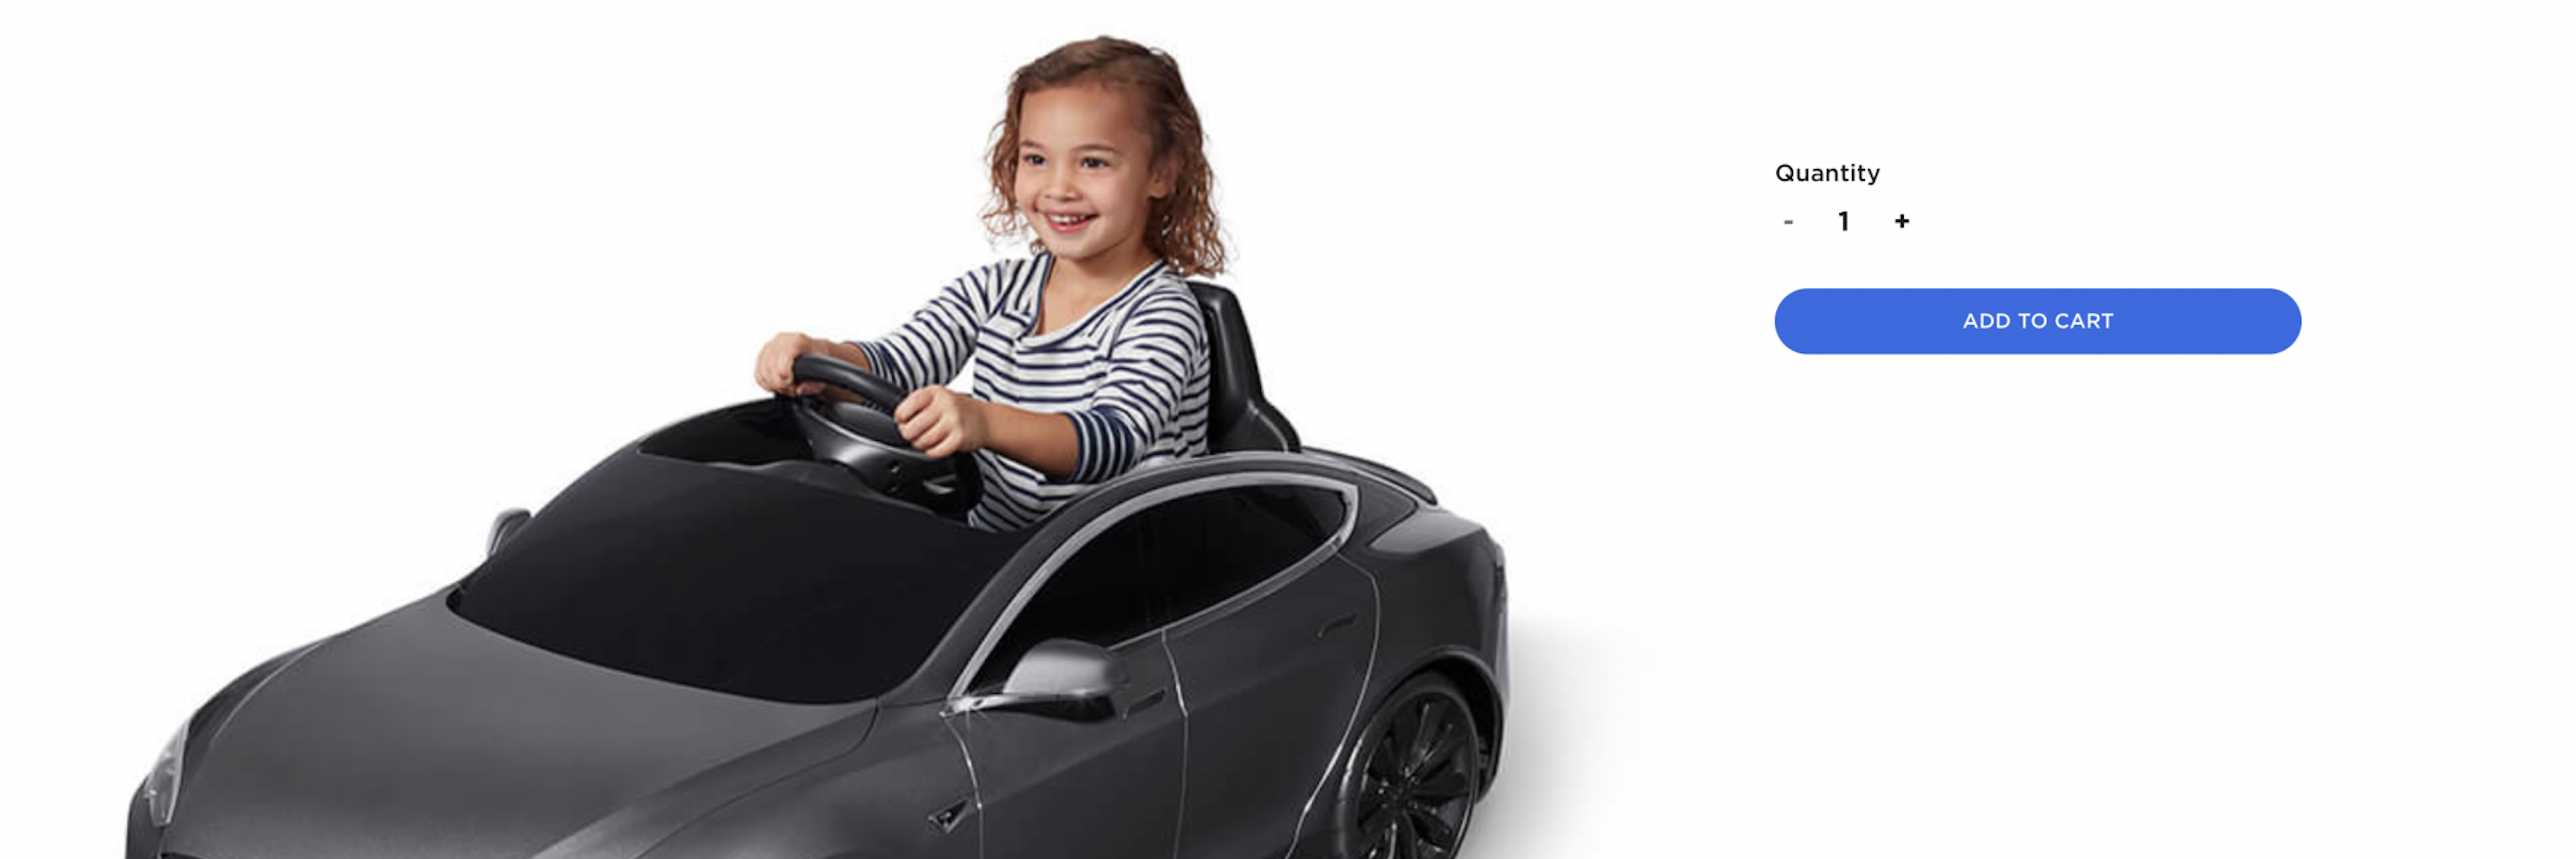 A screenshot from the Tesla e-commerce shop showing a child in a toy car